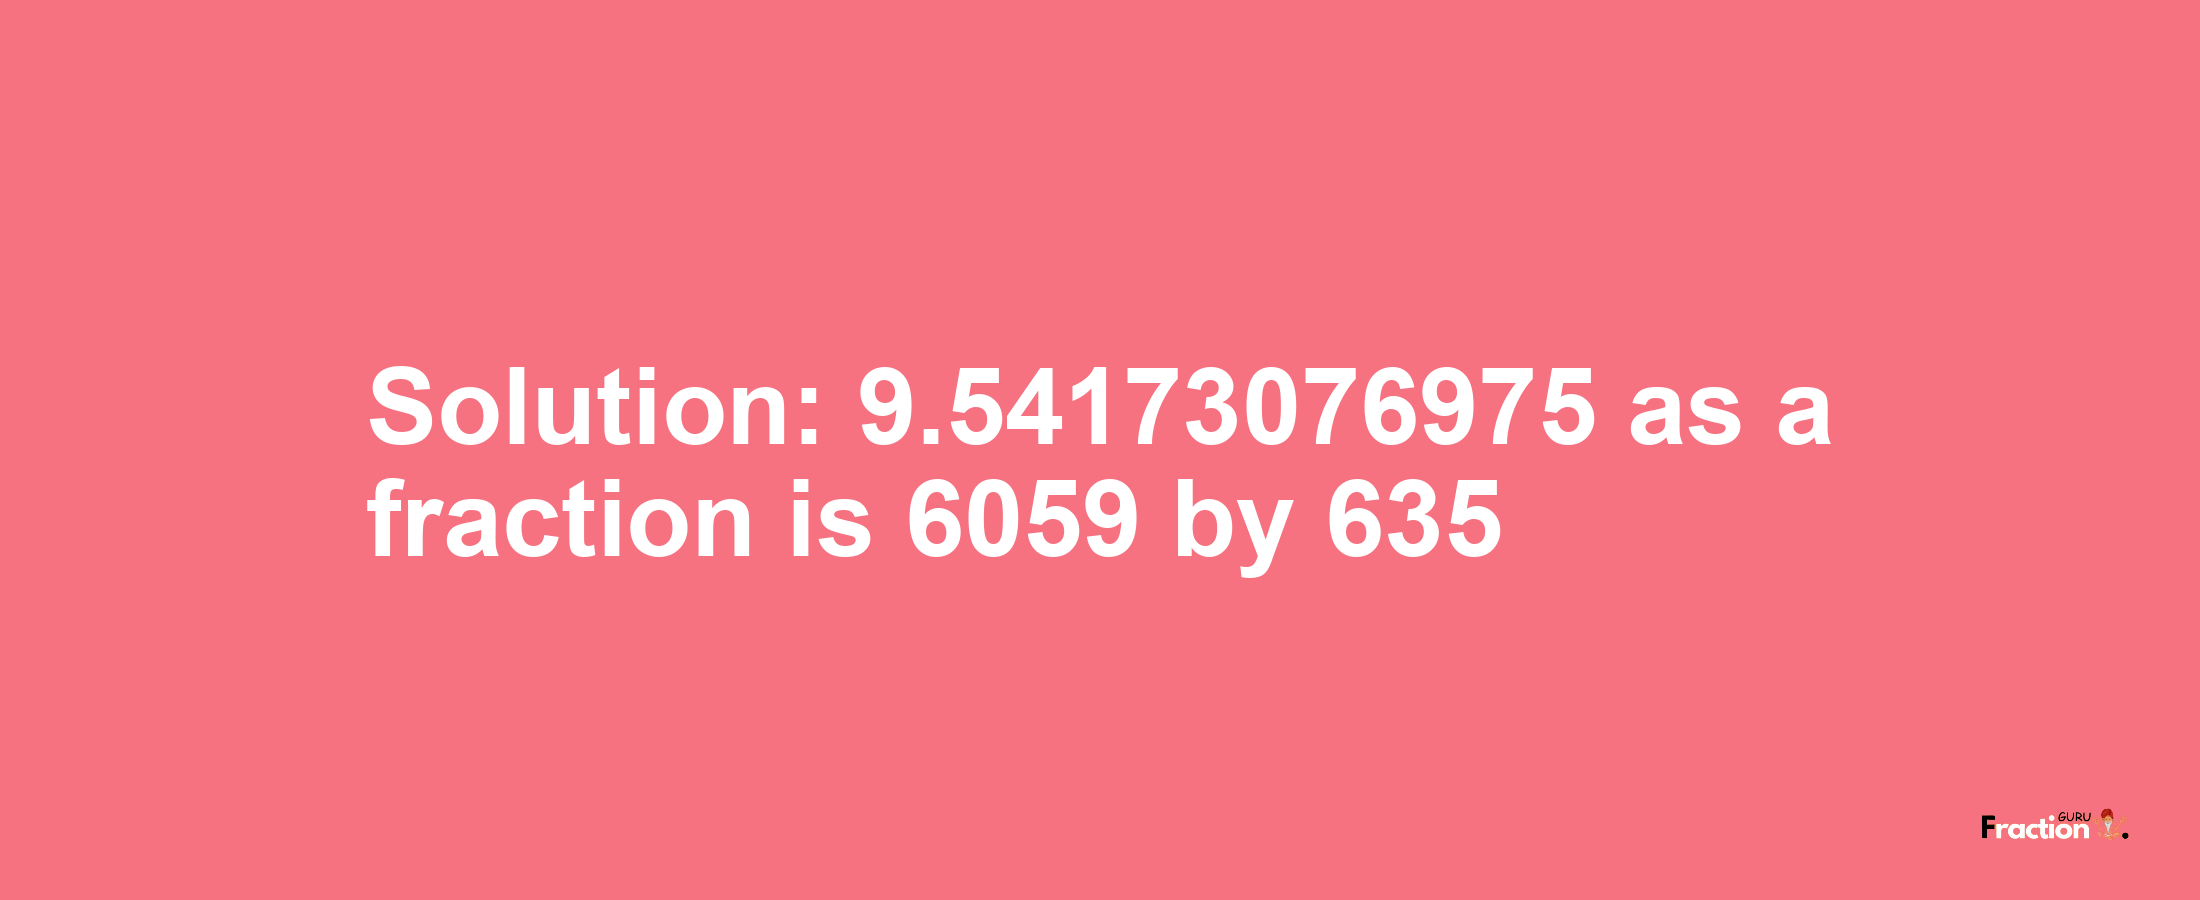 Solution:9.54173076975 as a fraction is 6059/635